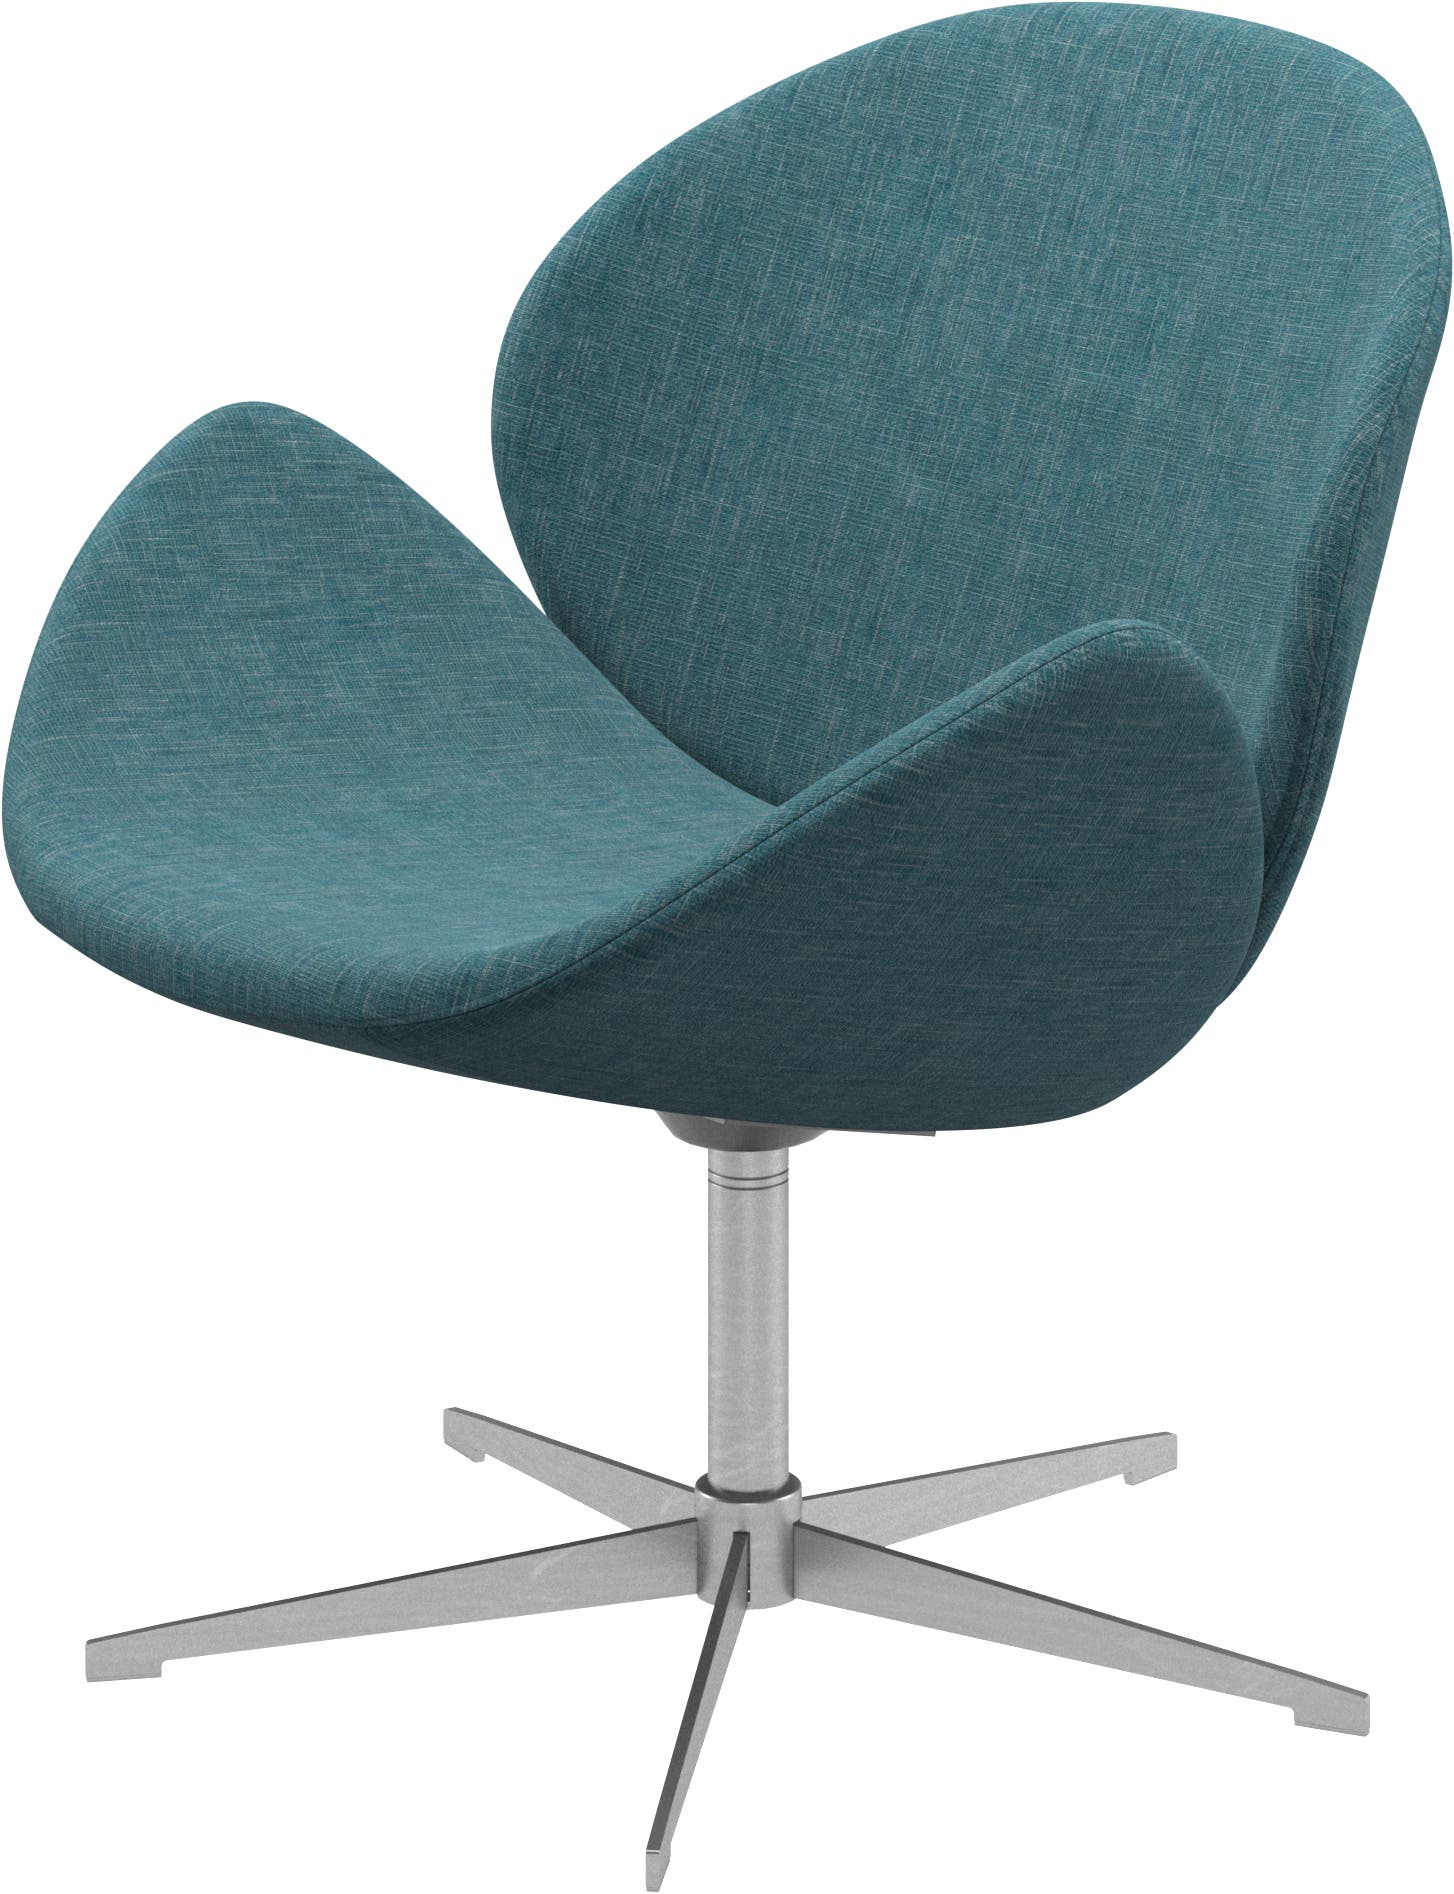 Ogi chair with swivel function